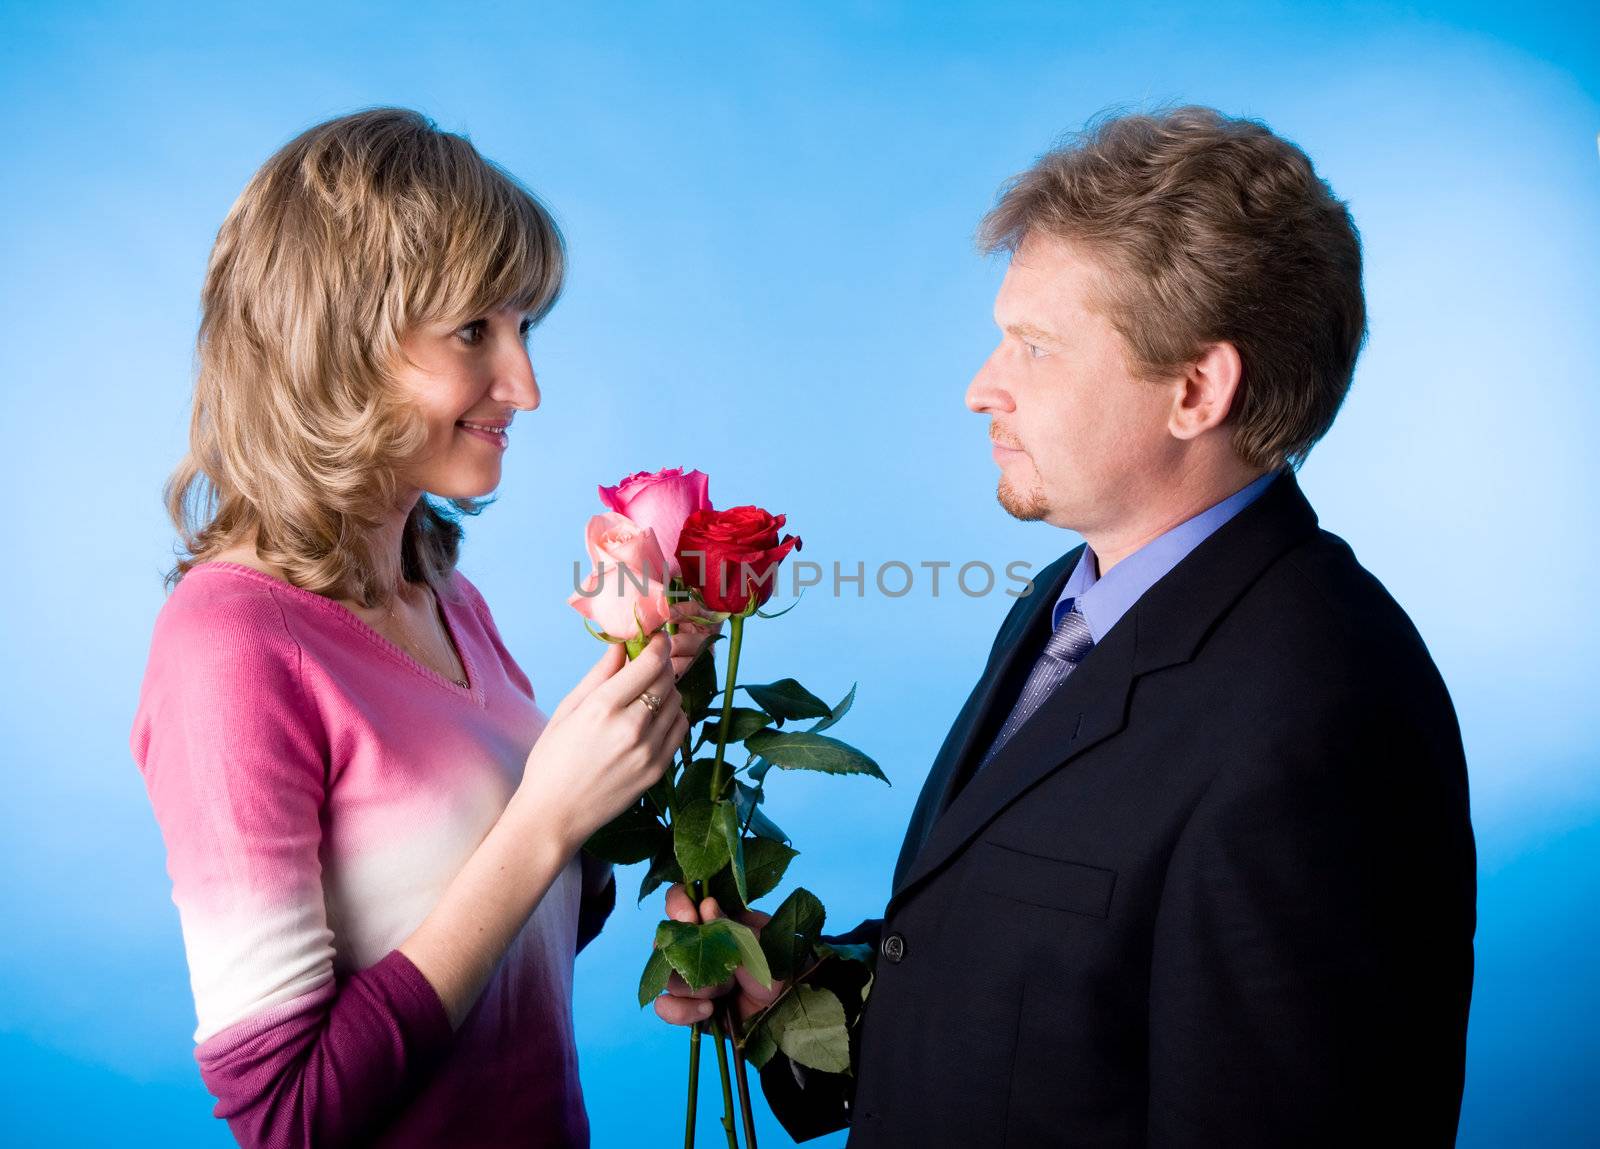 The man in a suit has presented the bouquet of flowers